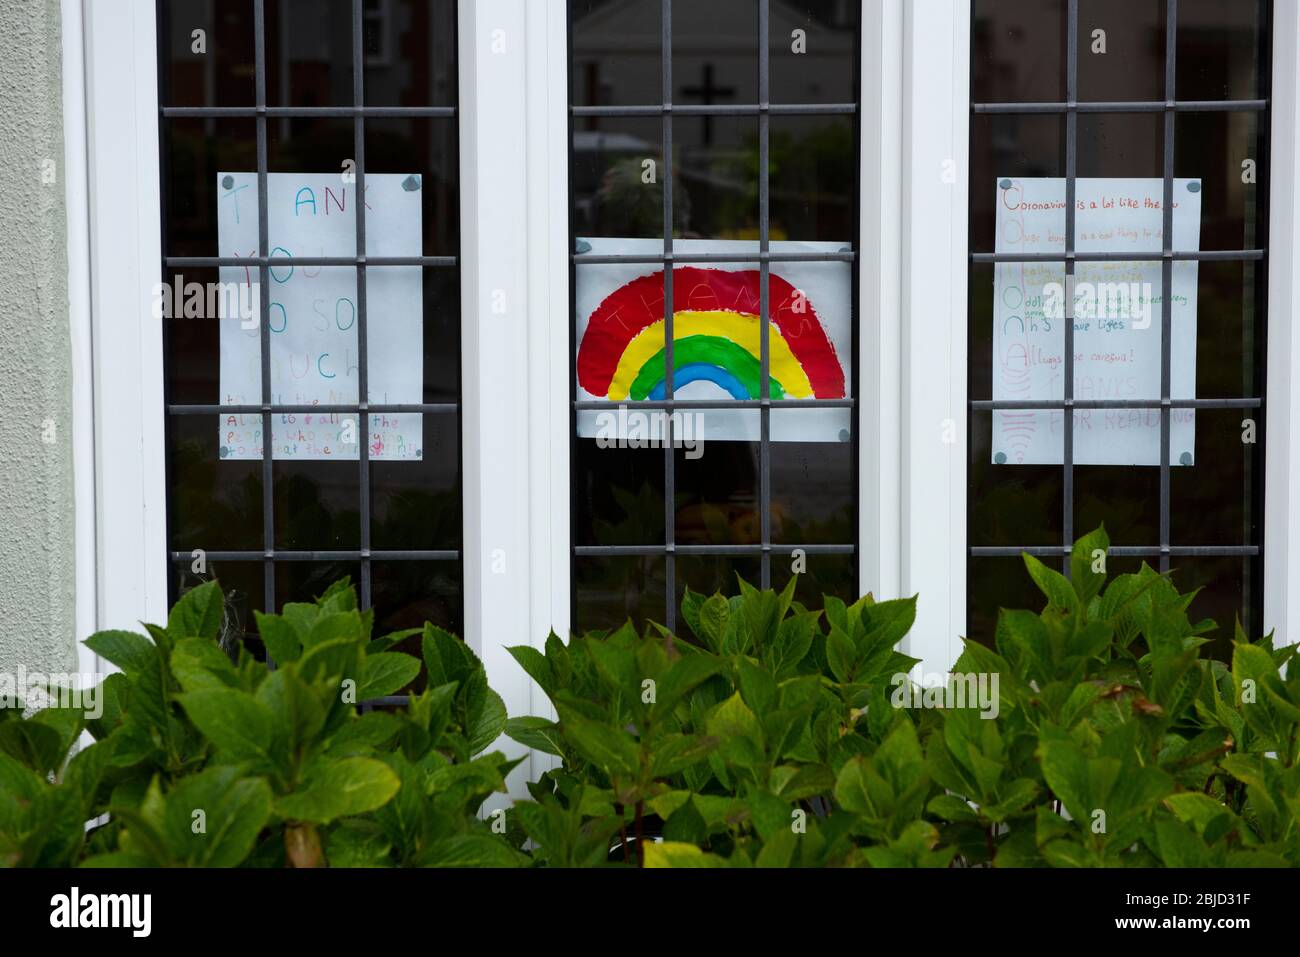 Thaxted, UK. 29th Apr, 2020. Coronovirus Lock Down. Thaxted Essex England. Rainbow salutes to NHS and all essential workers. 29 April 2020 Childrens drawings of a rainbow decorate many windows in Thaxted Essex UK as a show of support for the NHS (National Health Service) and all essential workers during the Coronavirus pandemic lock dow. Photograph by Credit: BRIAN HARRIS/Alamy Live News Stock Photo